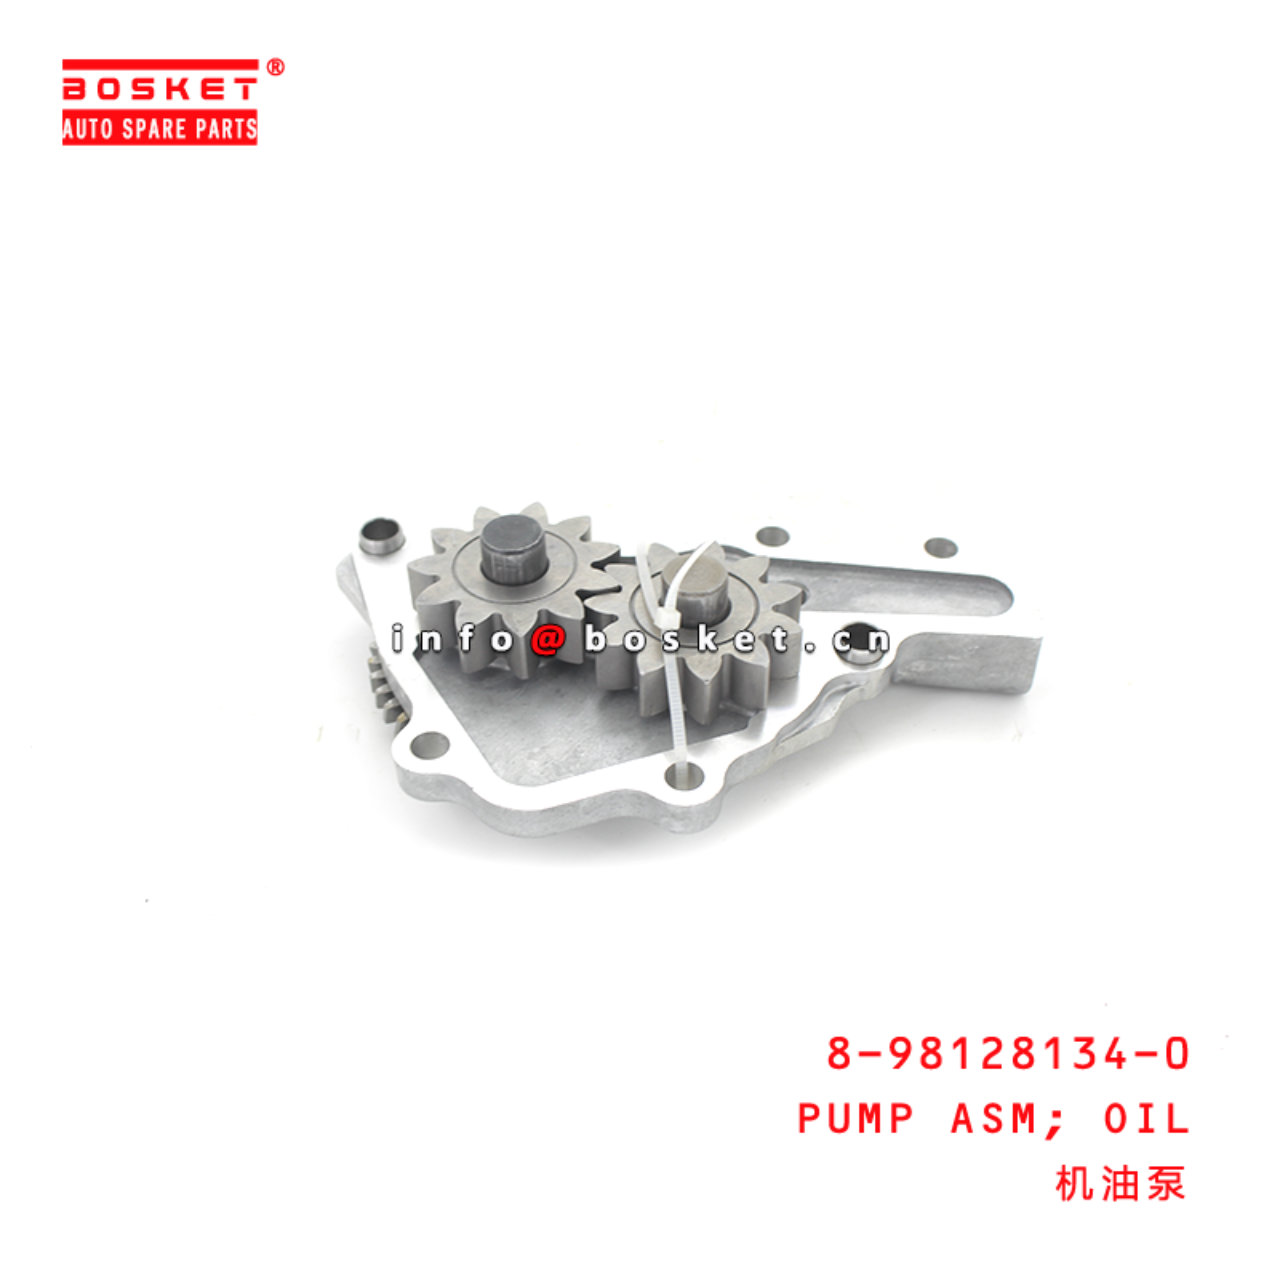 8-98128134-0 Oil Pump Assembly Suitable for ISUZU NLR85 8981281340